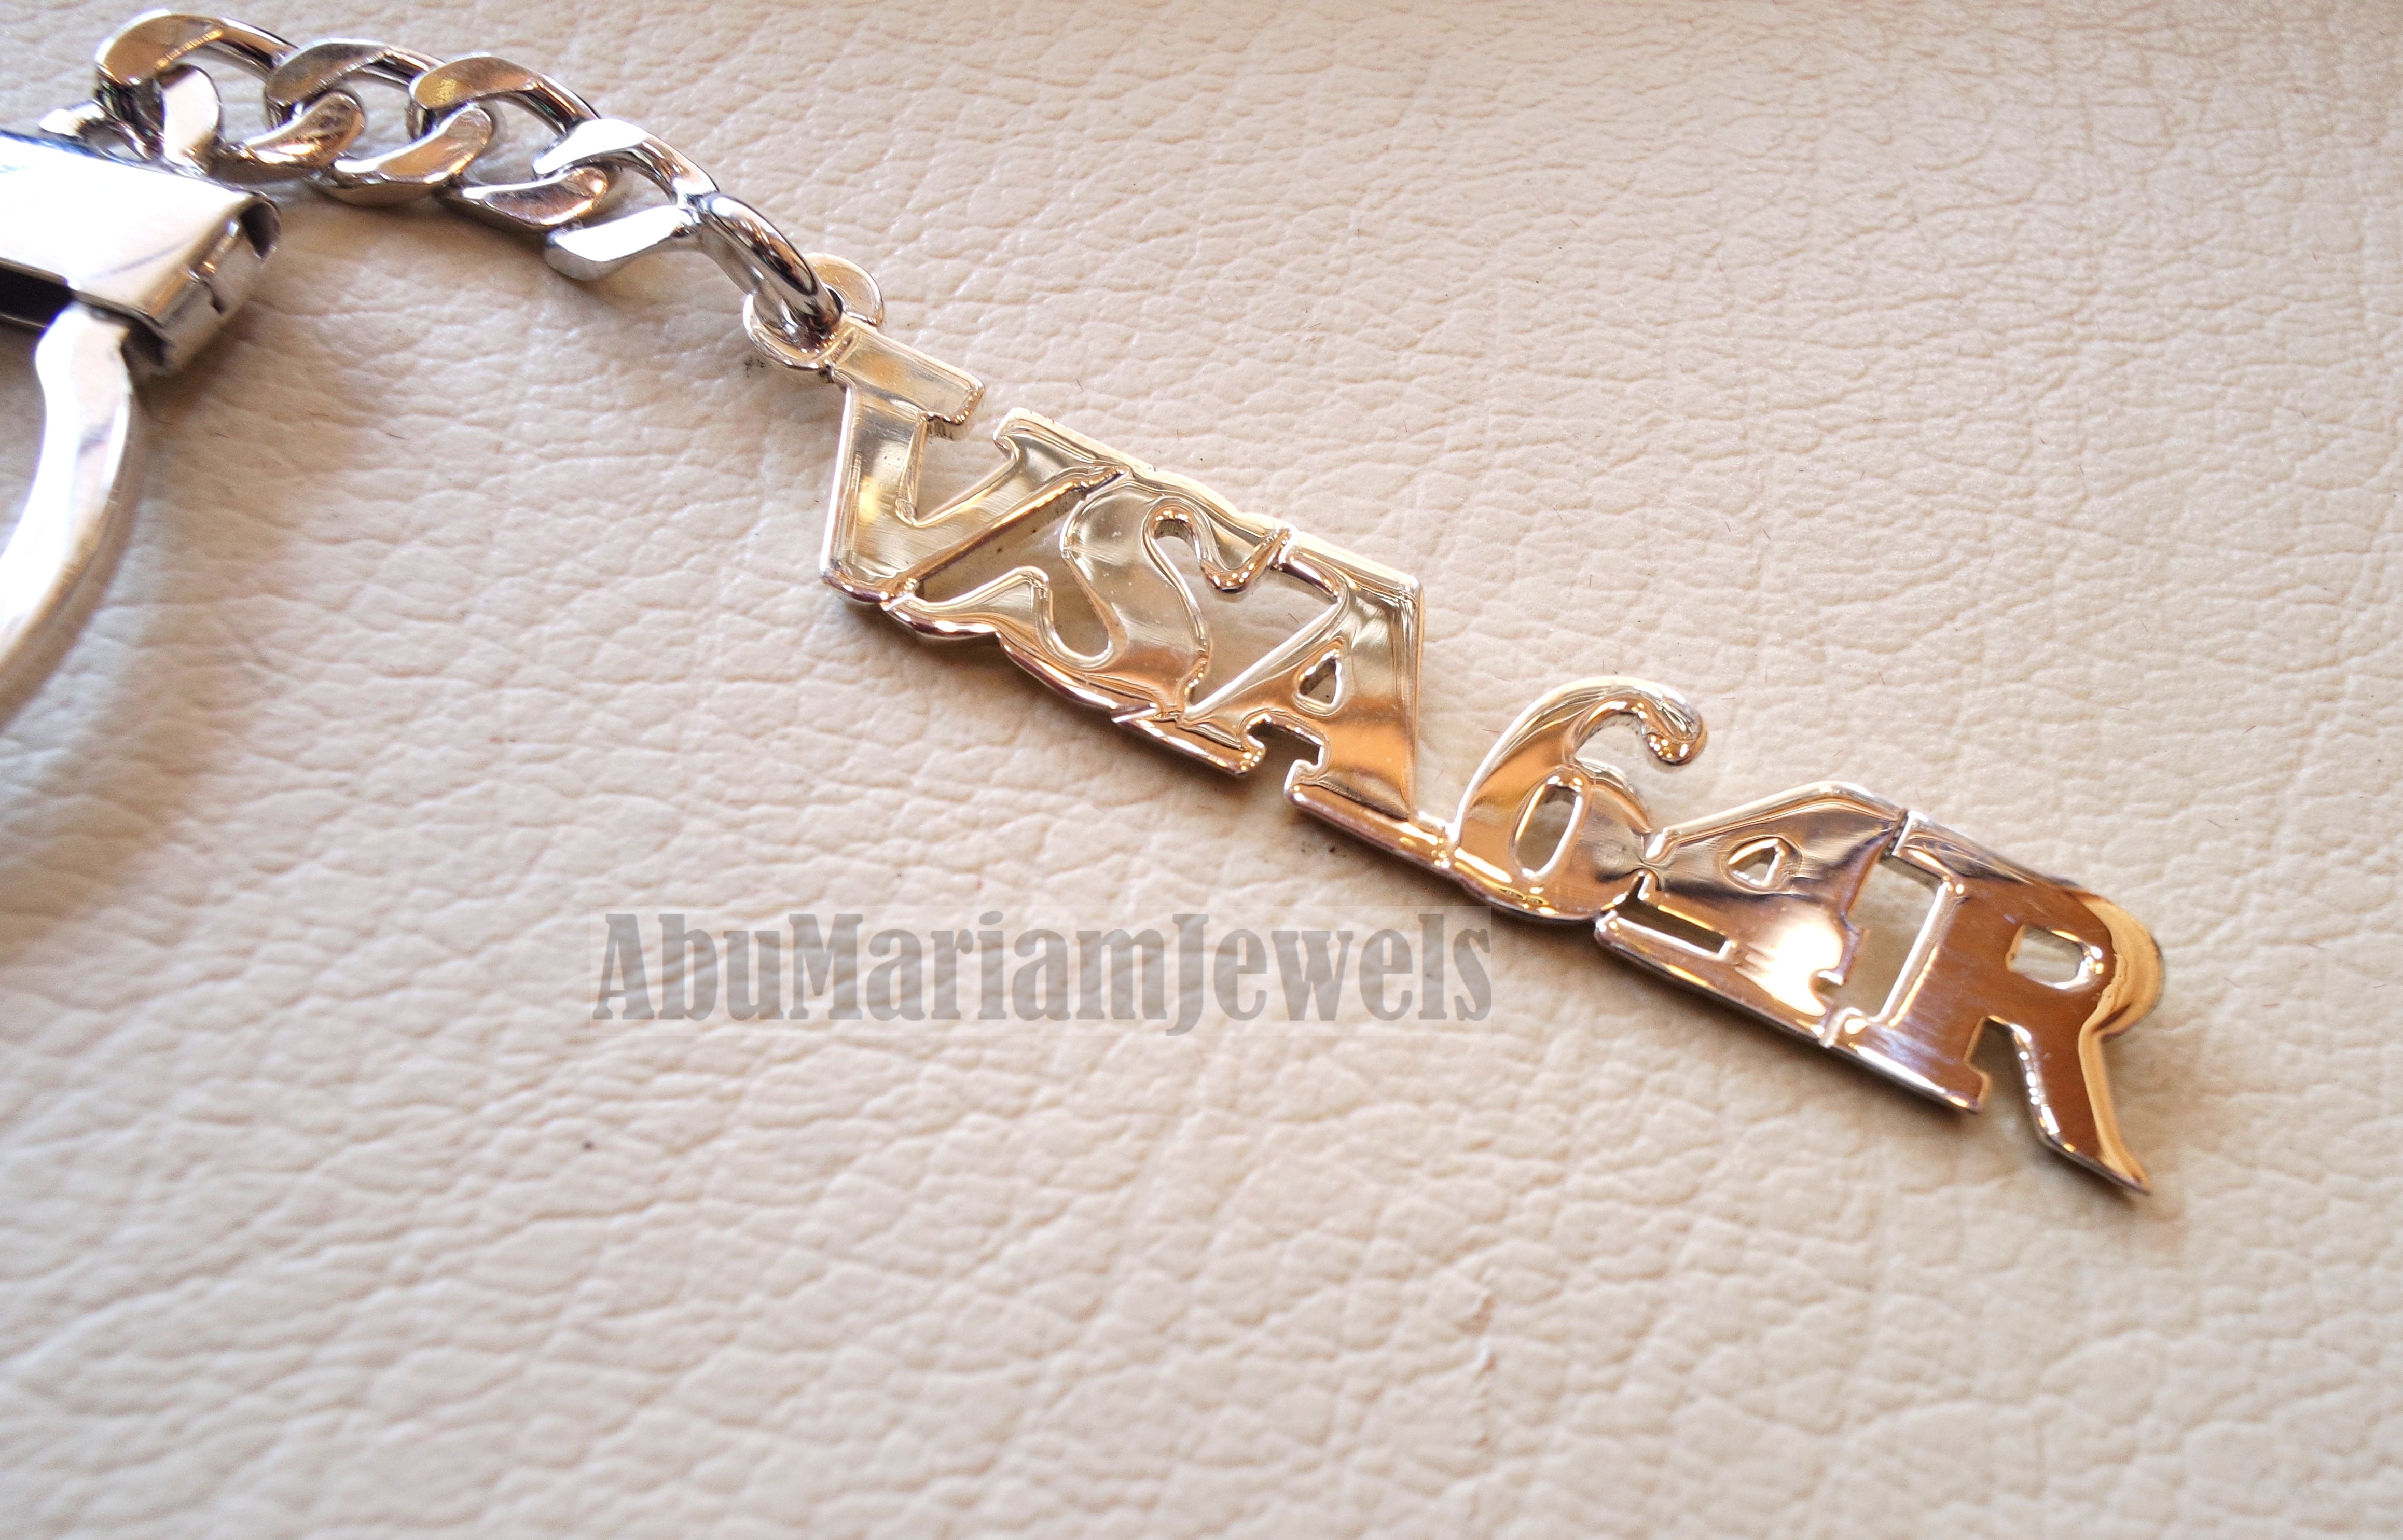 Key chain Personalized customized car number made to order sterling silver 925 or any similar design or shape Key_car